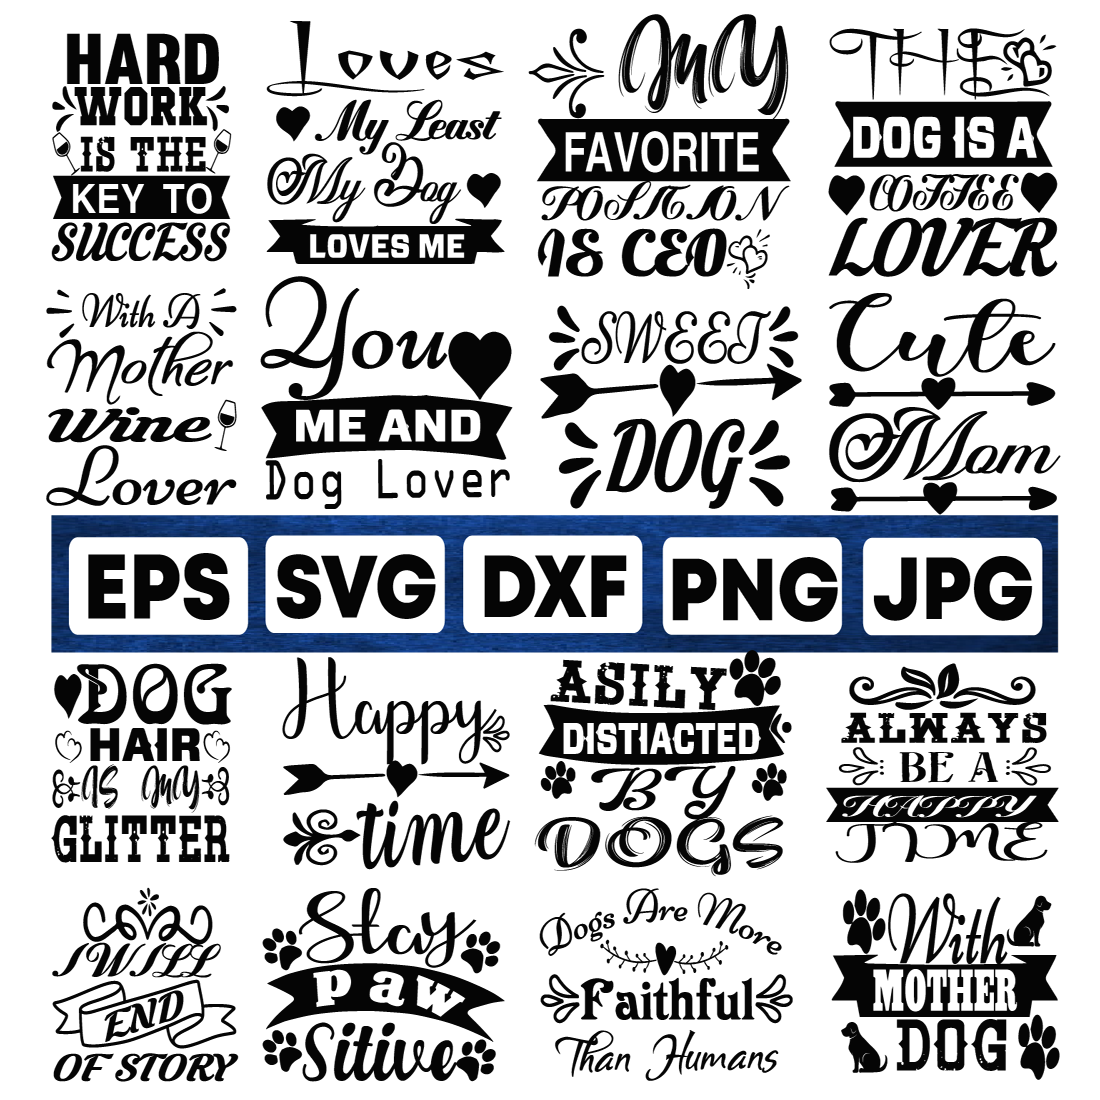 The words eps svg dxf png jpg on a black background.